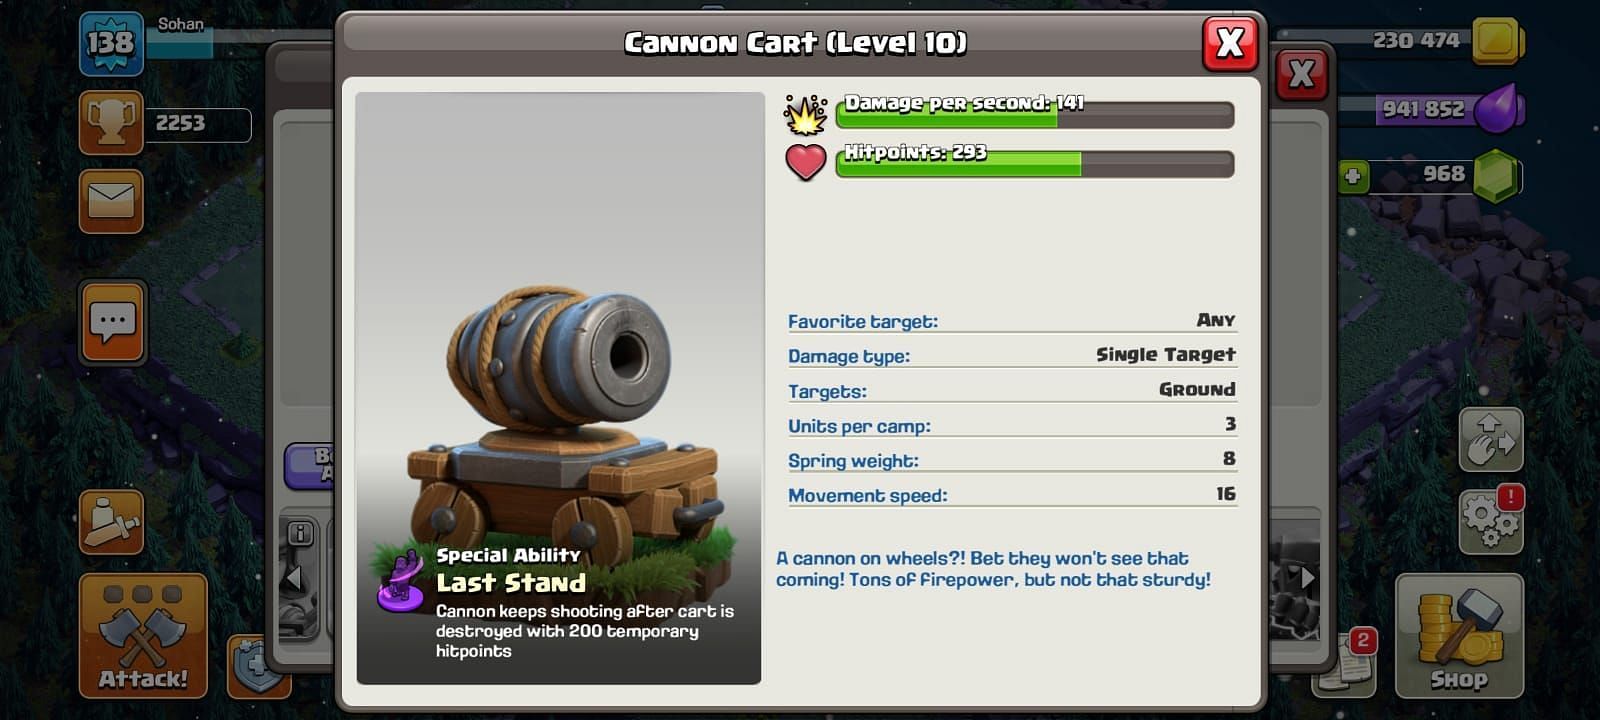 The Cannon Cart in Clash of Clans (Image via Sportskeeda)